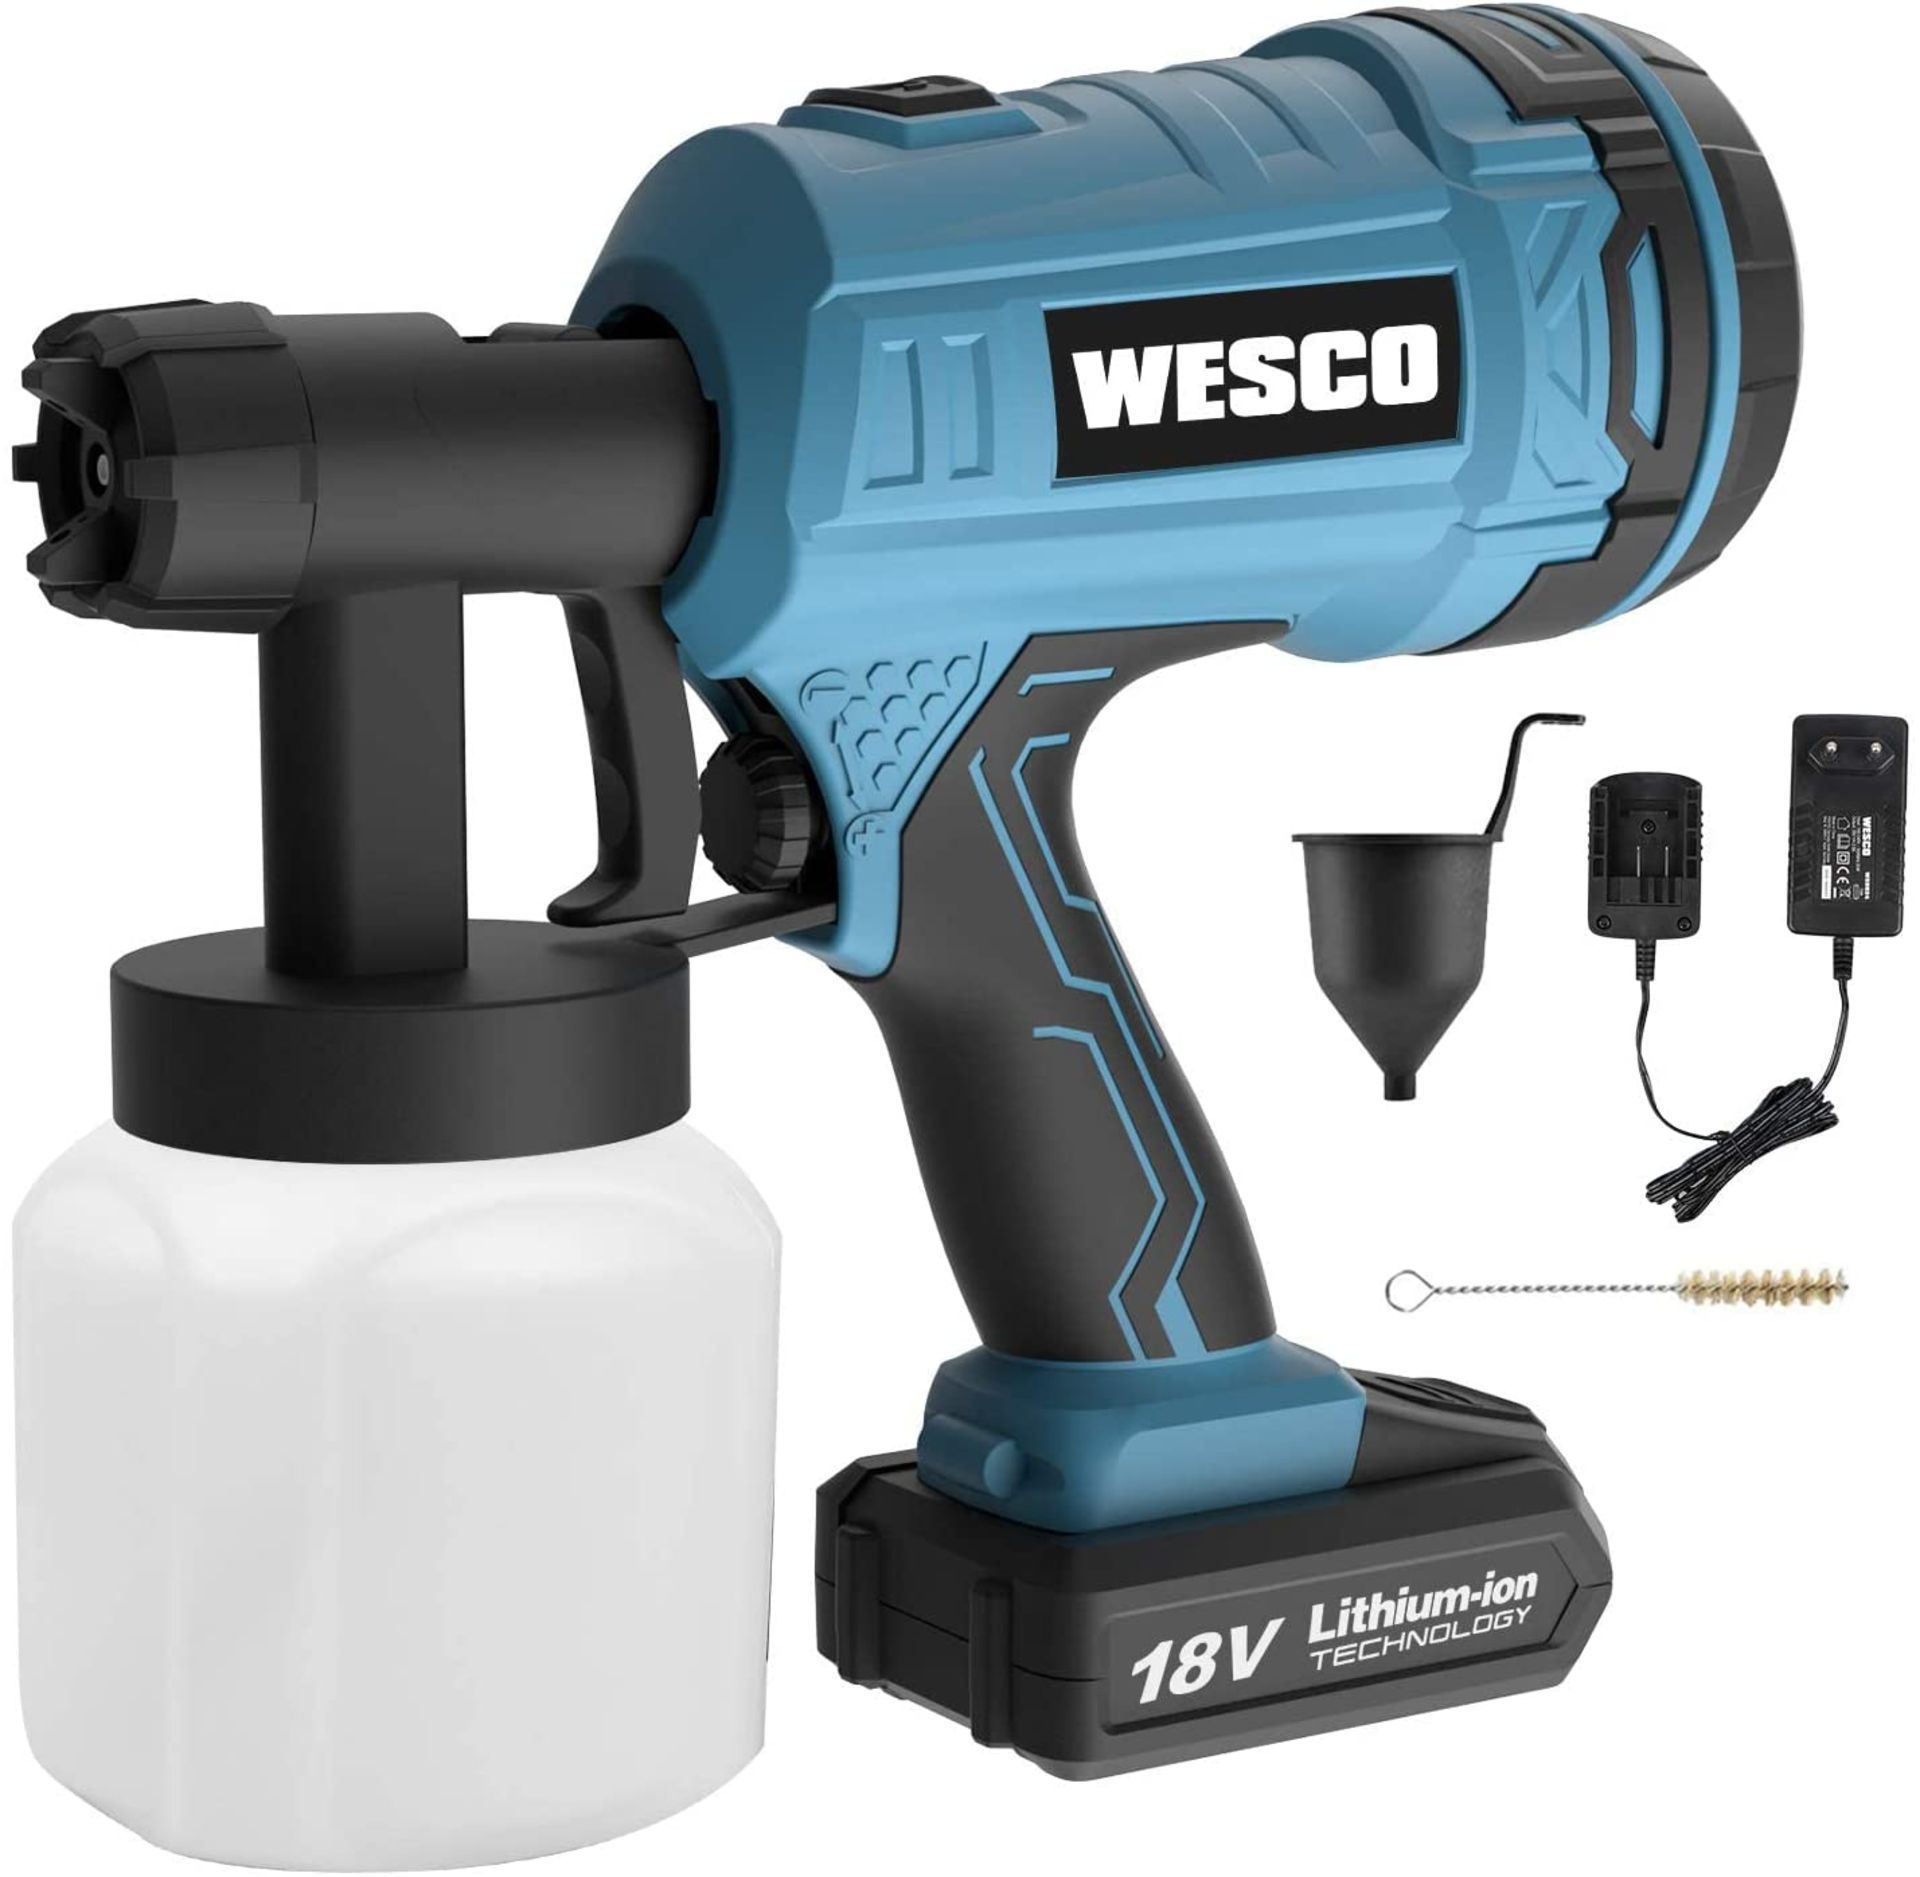 PALLET TO CONTAIN 36 x New Boxed WESCO 18V 2.0AH 500ml/min Paint Spray Gun with 2.5mm Nozzles and